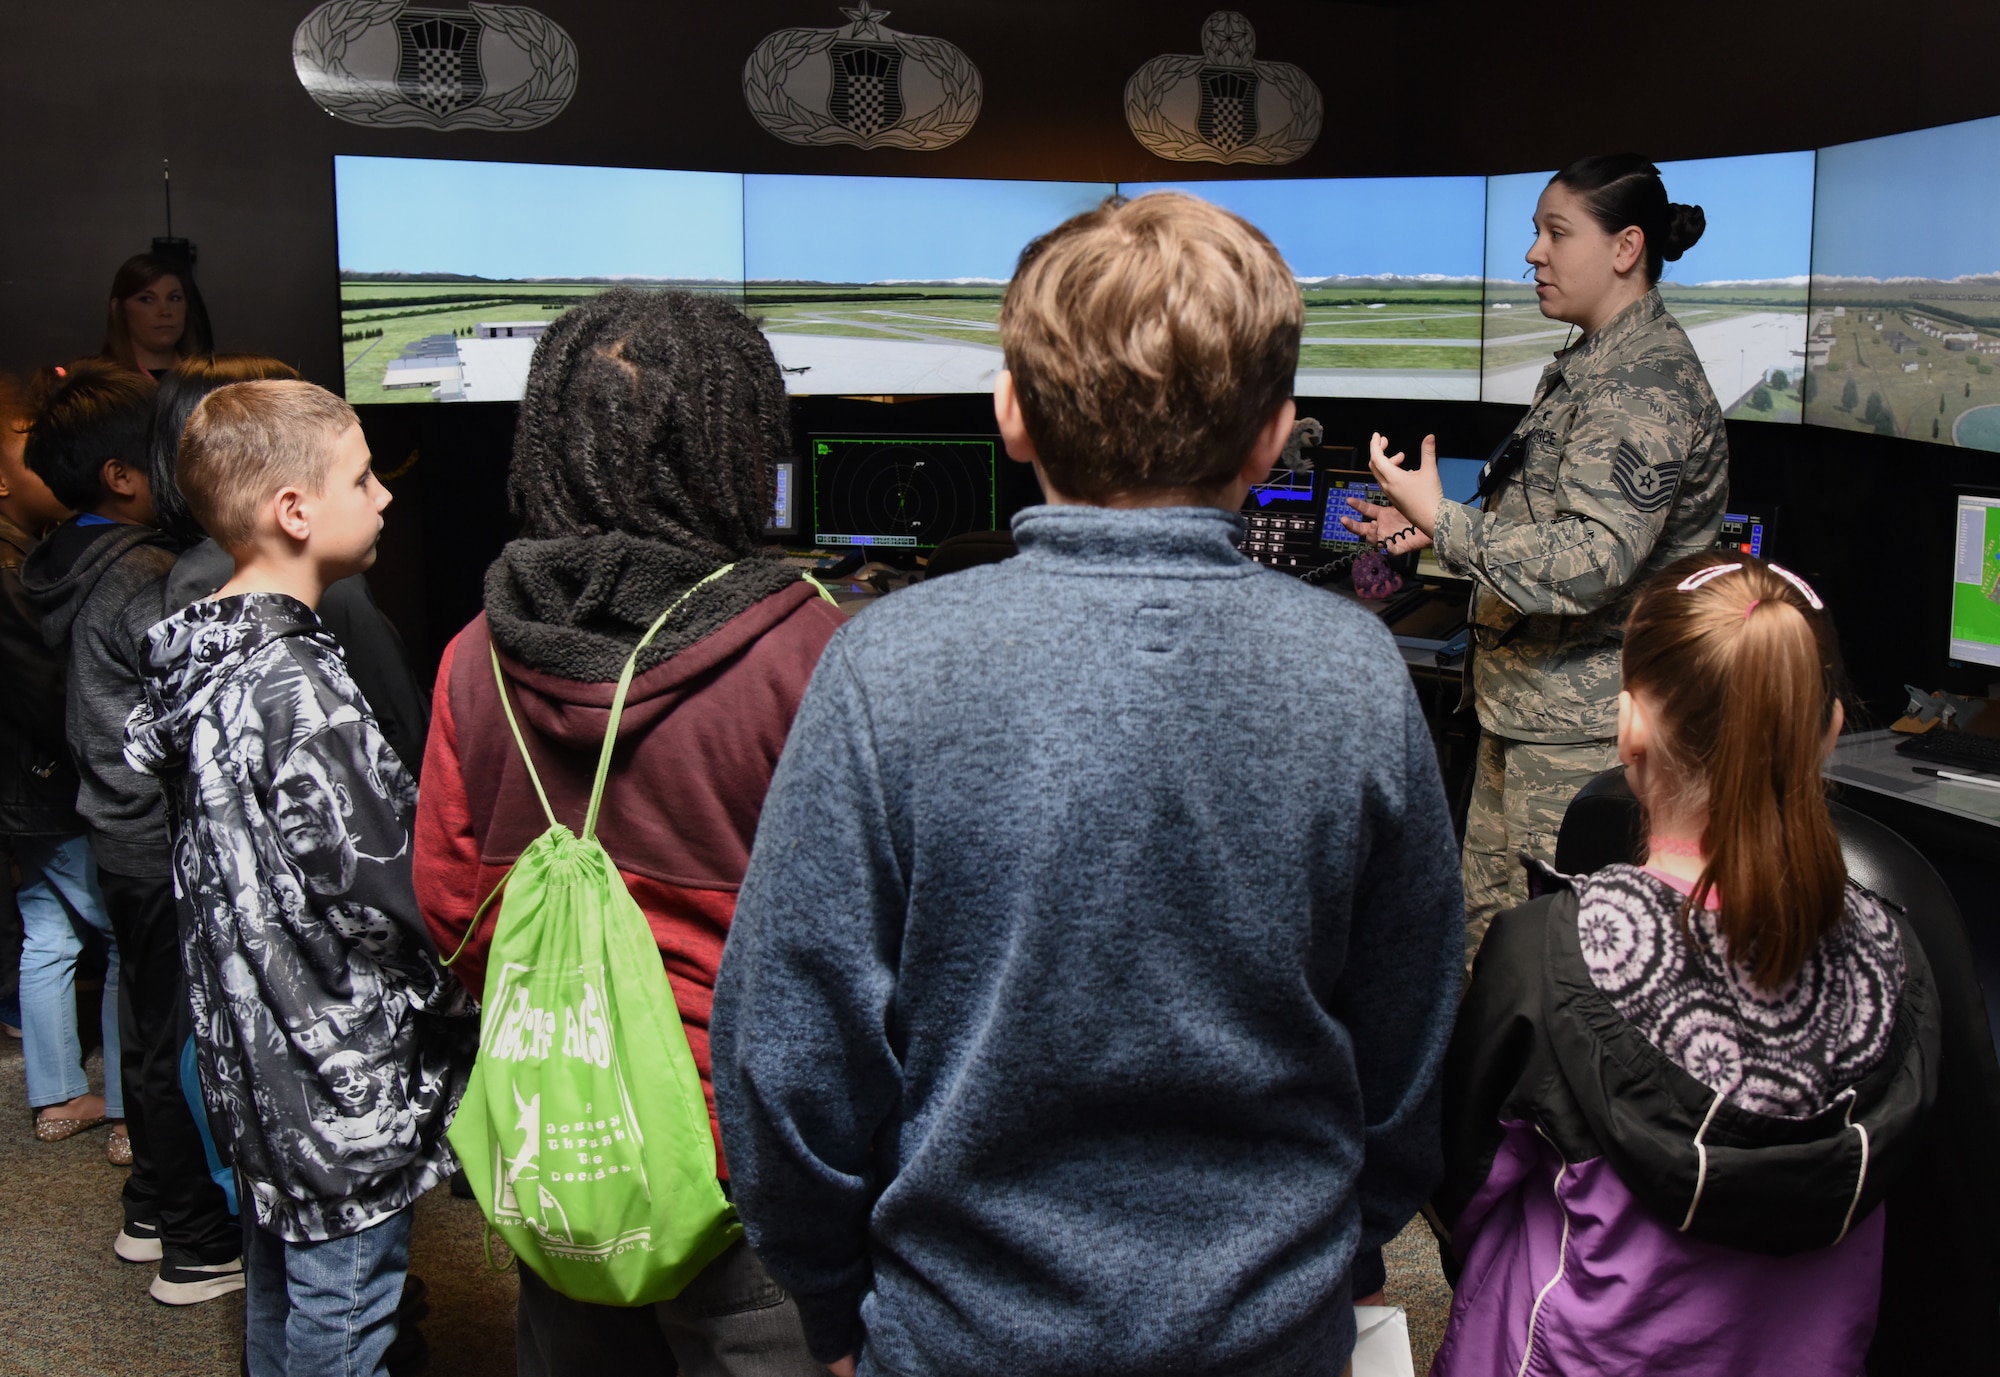 U.S. Air Force Tech. Sgt. Carolyn Alexander, 334th Training Squadron instructor, provides an air traffic control tower simulator demonstration to school-aged children during Biloxi School District Career Exploration Day on Keesler Air Force Base, Mississippi, March 7, 2019. The children also toured the Keesler Fire Department, 335th TRS weather facility and received a demonstration from the 81st Security Forces Squadron military working dogs. (U.S. Air Force photo by Kemberly Groue)